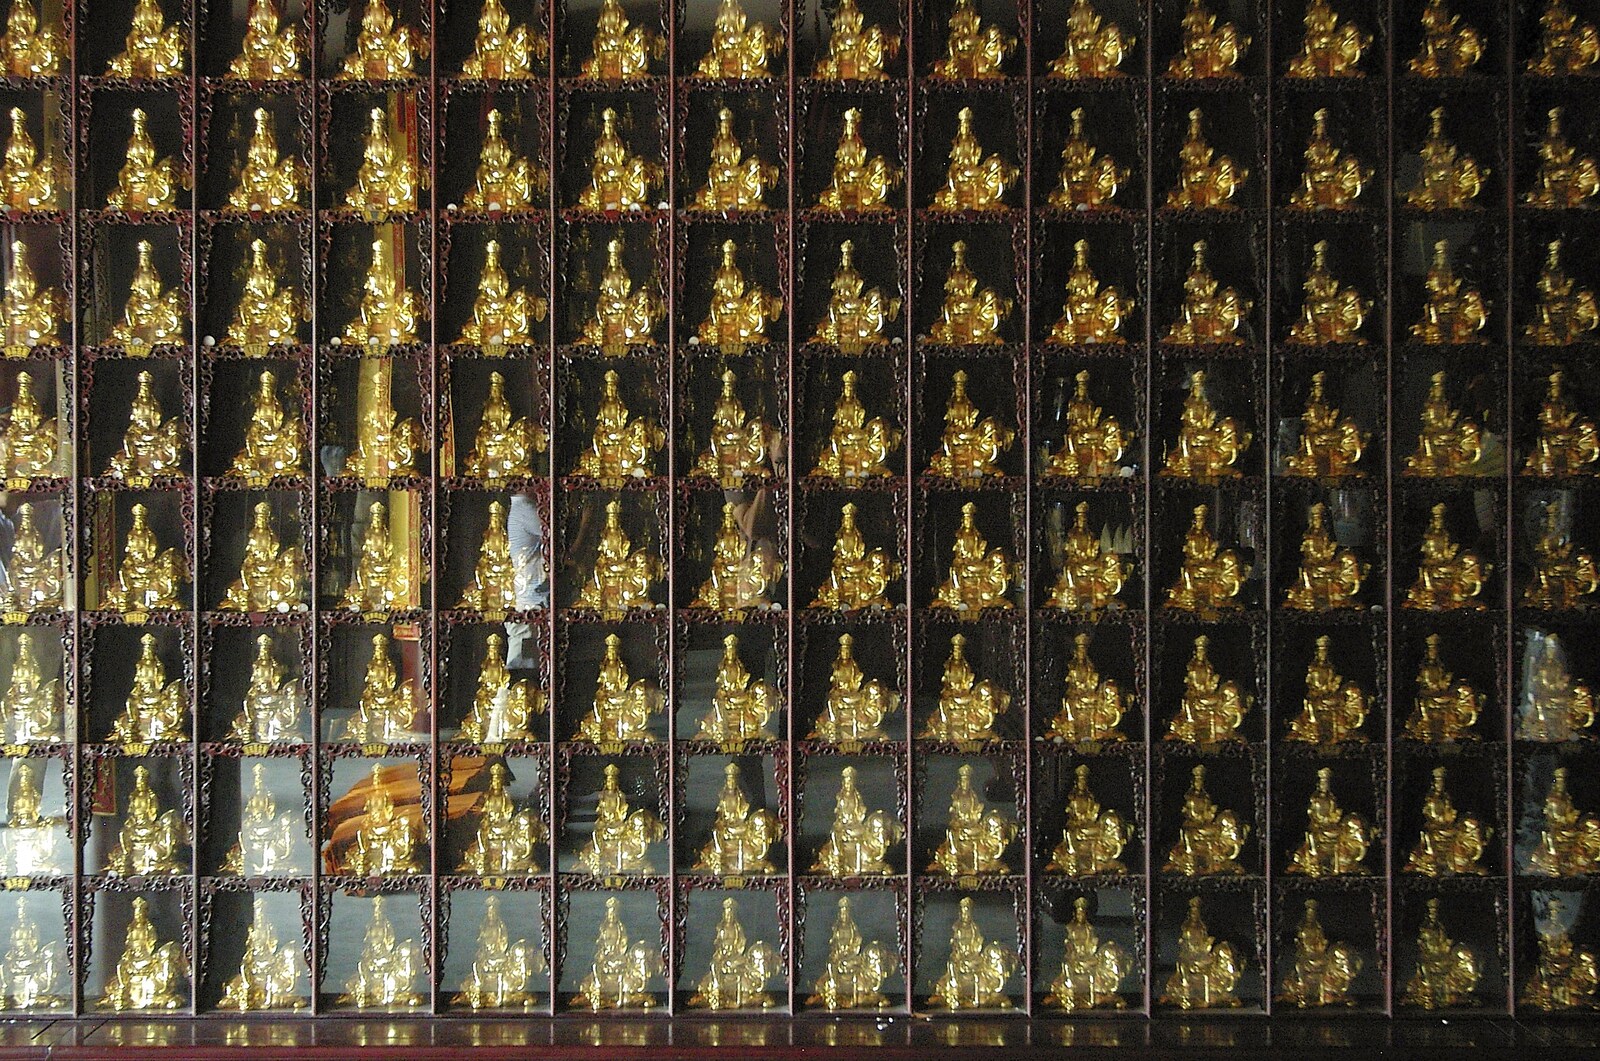 A thousand miniature Buddhas around the walls from A Few Days in Nanjing, Jiangsu Province, China - 7th October 2006